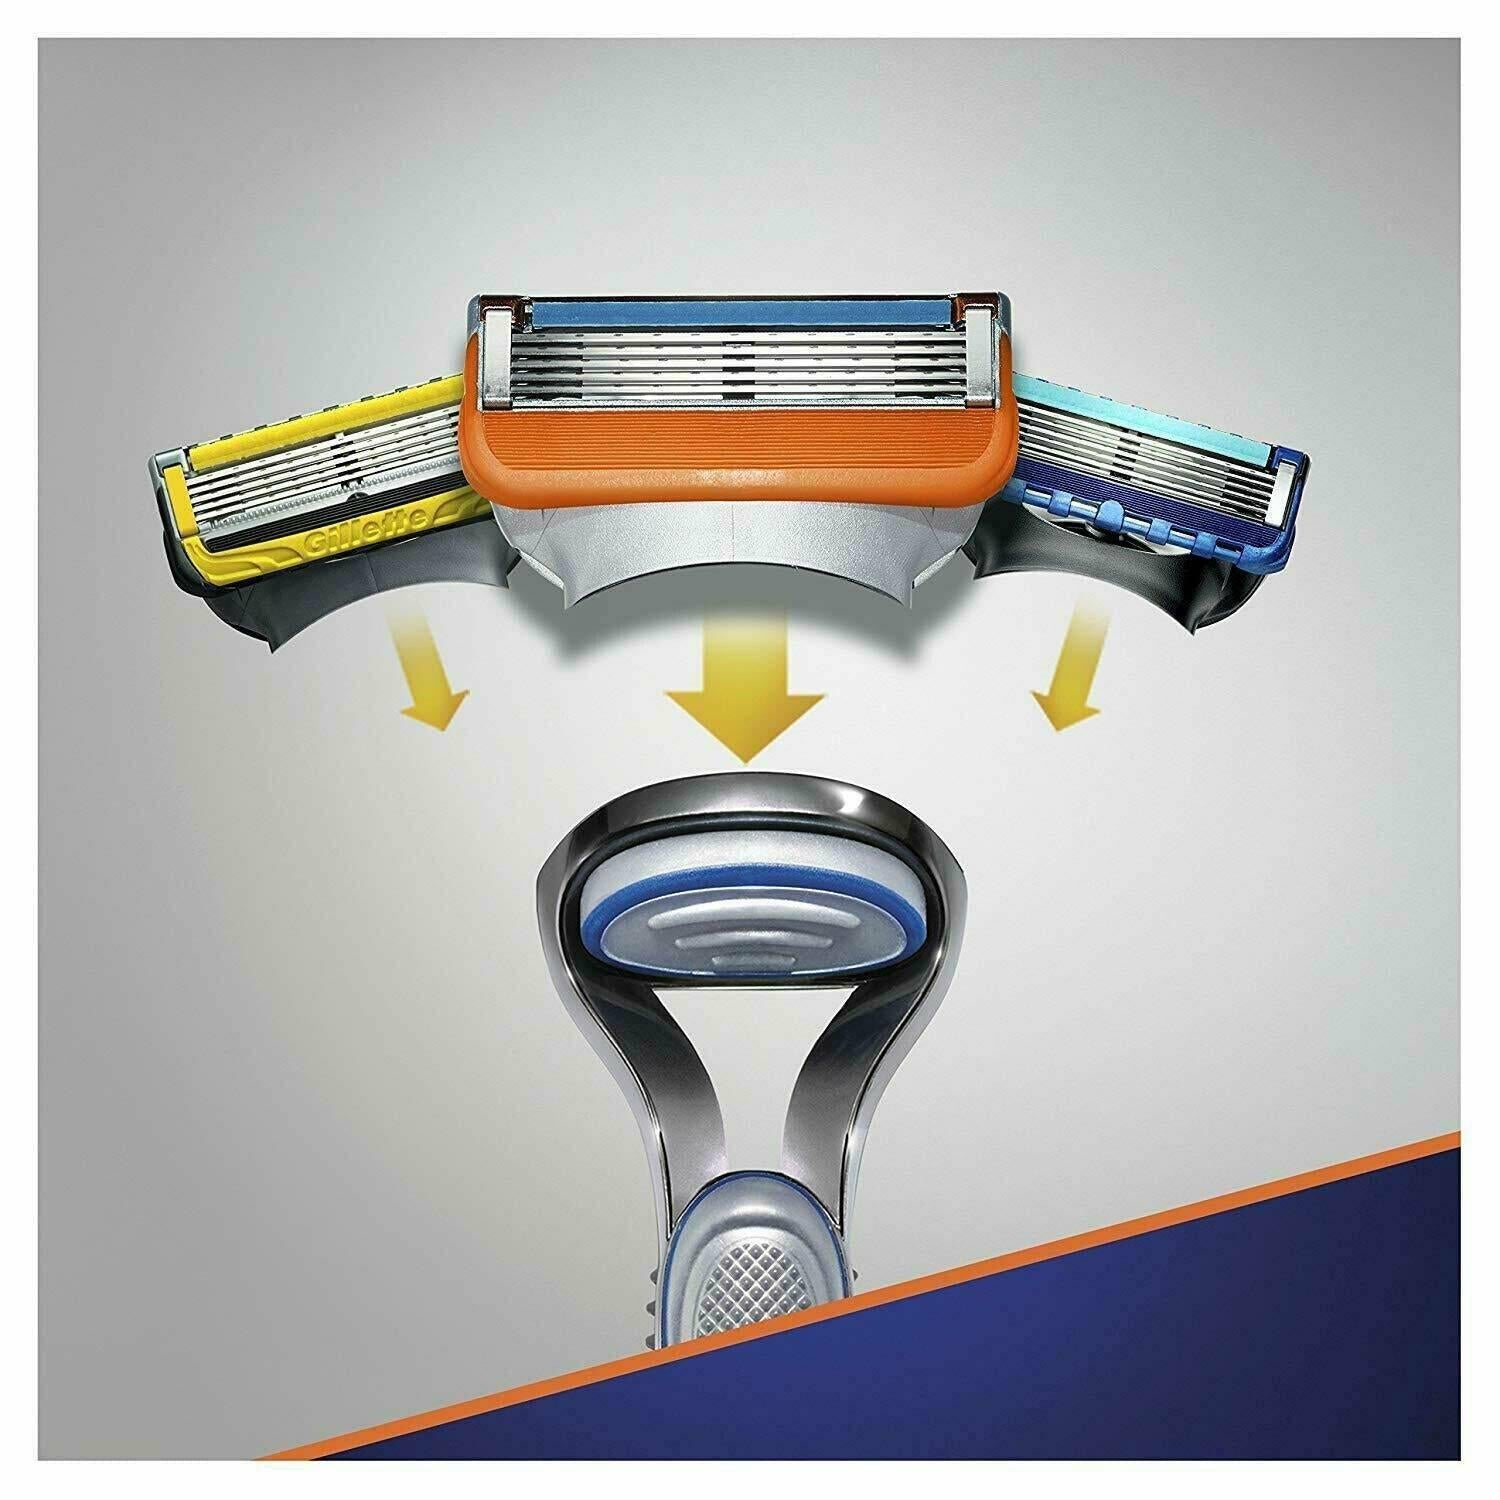 Gillette Fusion5 Razor Starter Pack with 4 Blades - Five-Blade Shave Technology - Healthxpress.ie